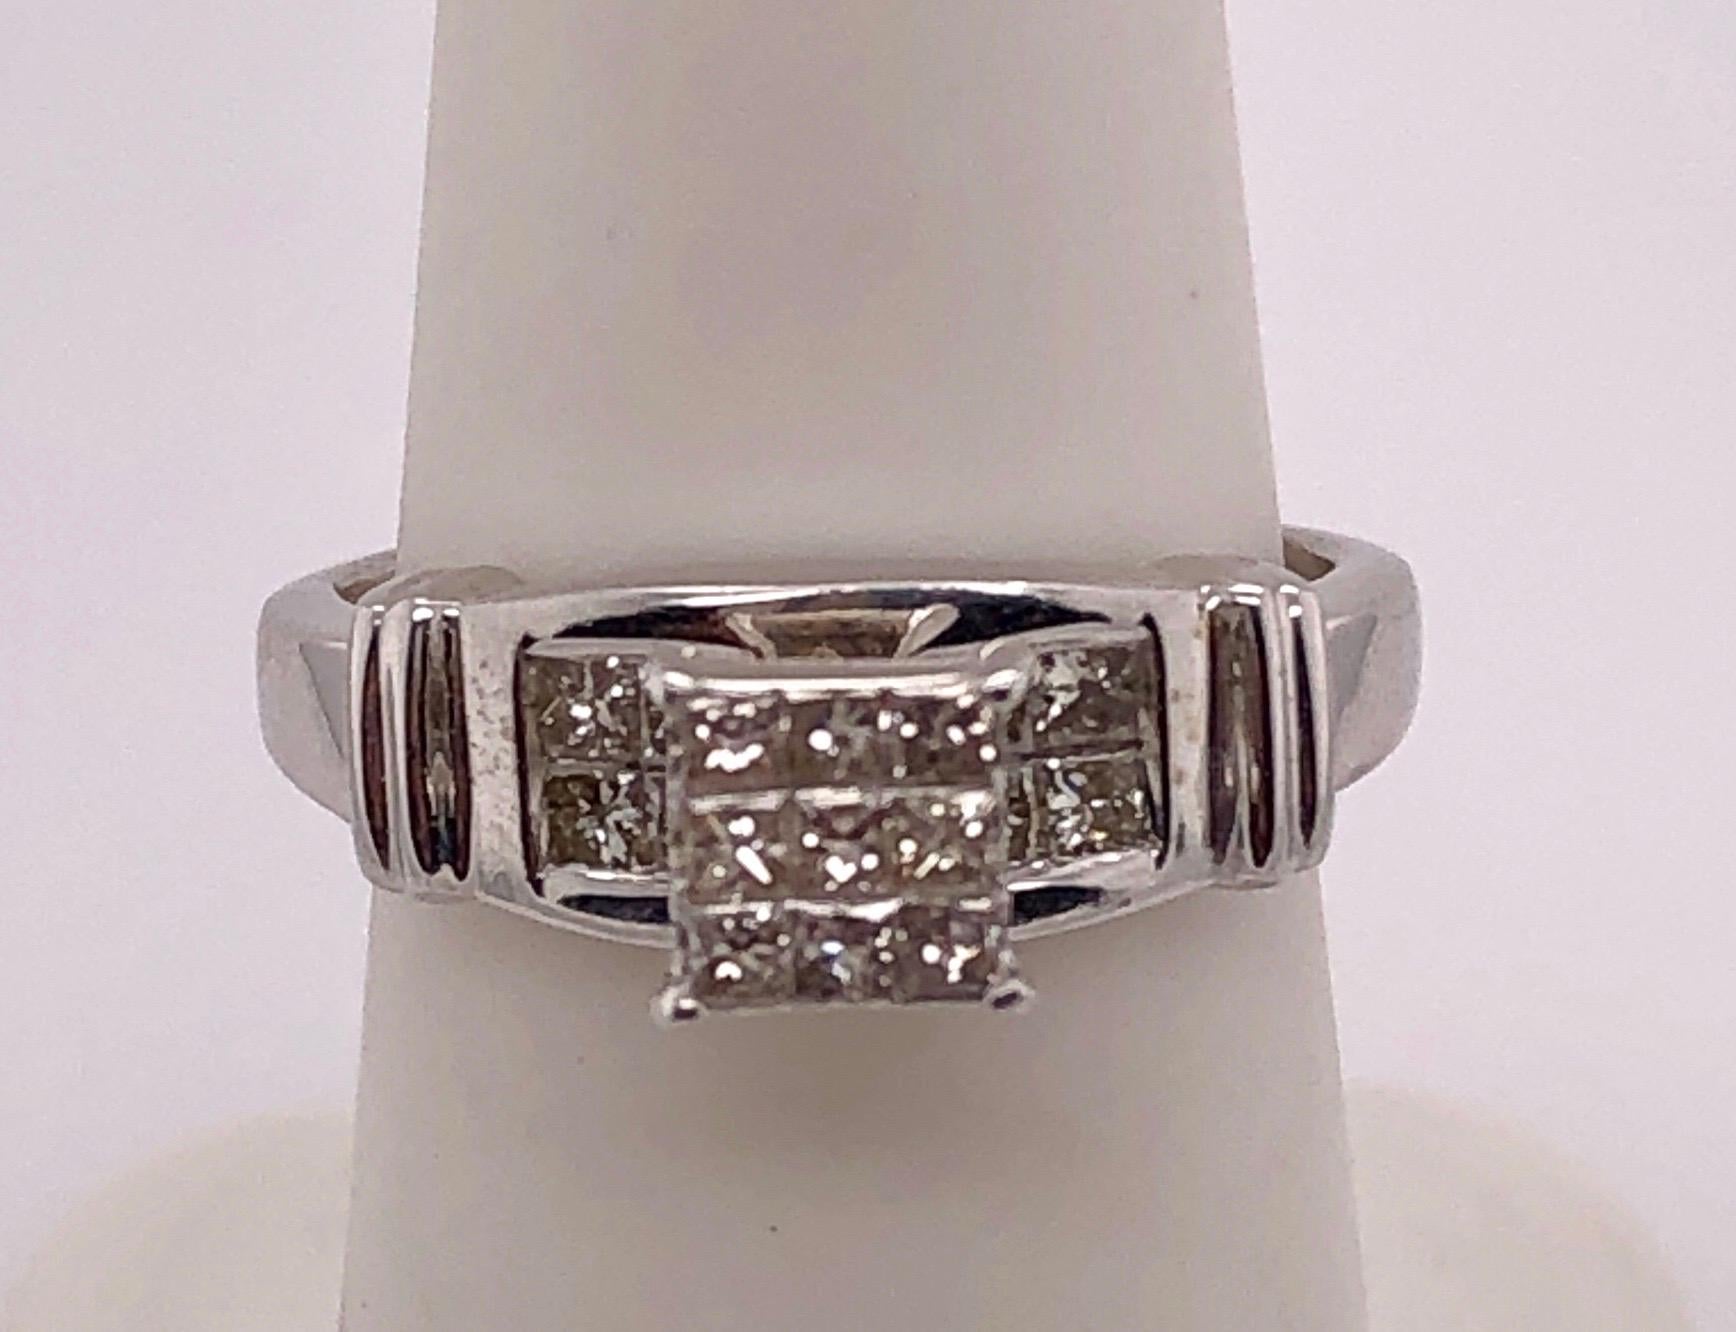 14Kt white Gold Contemporary Ring 1.00 Total Diamond Weight
Size 5.75 with 3.72 grams total weight.